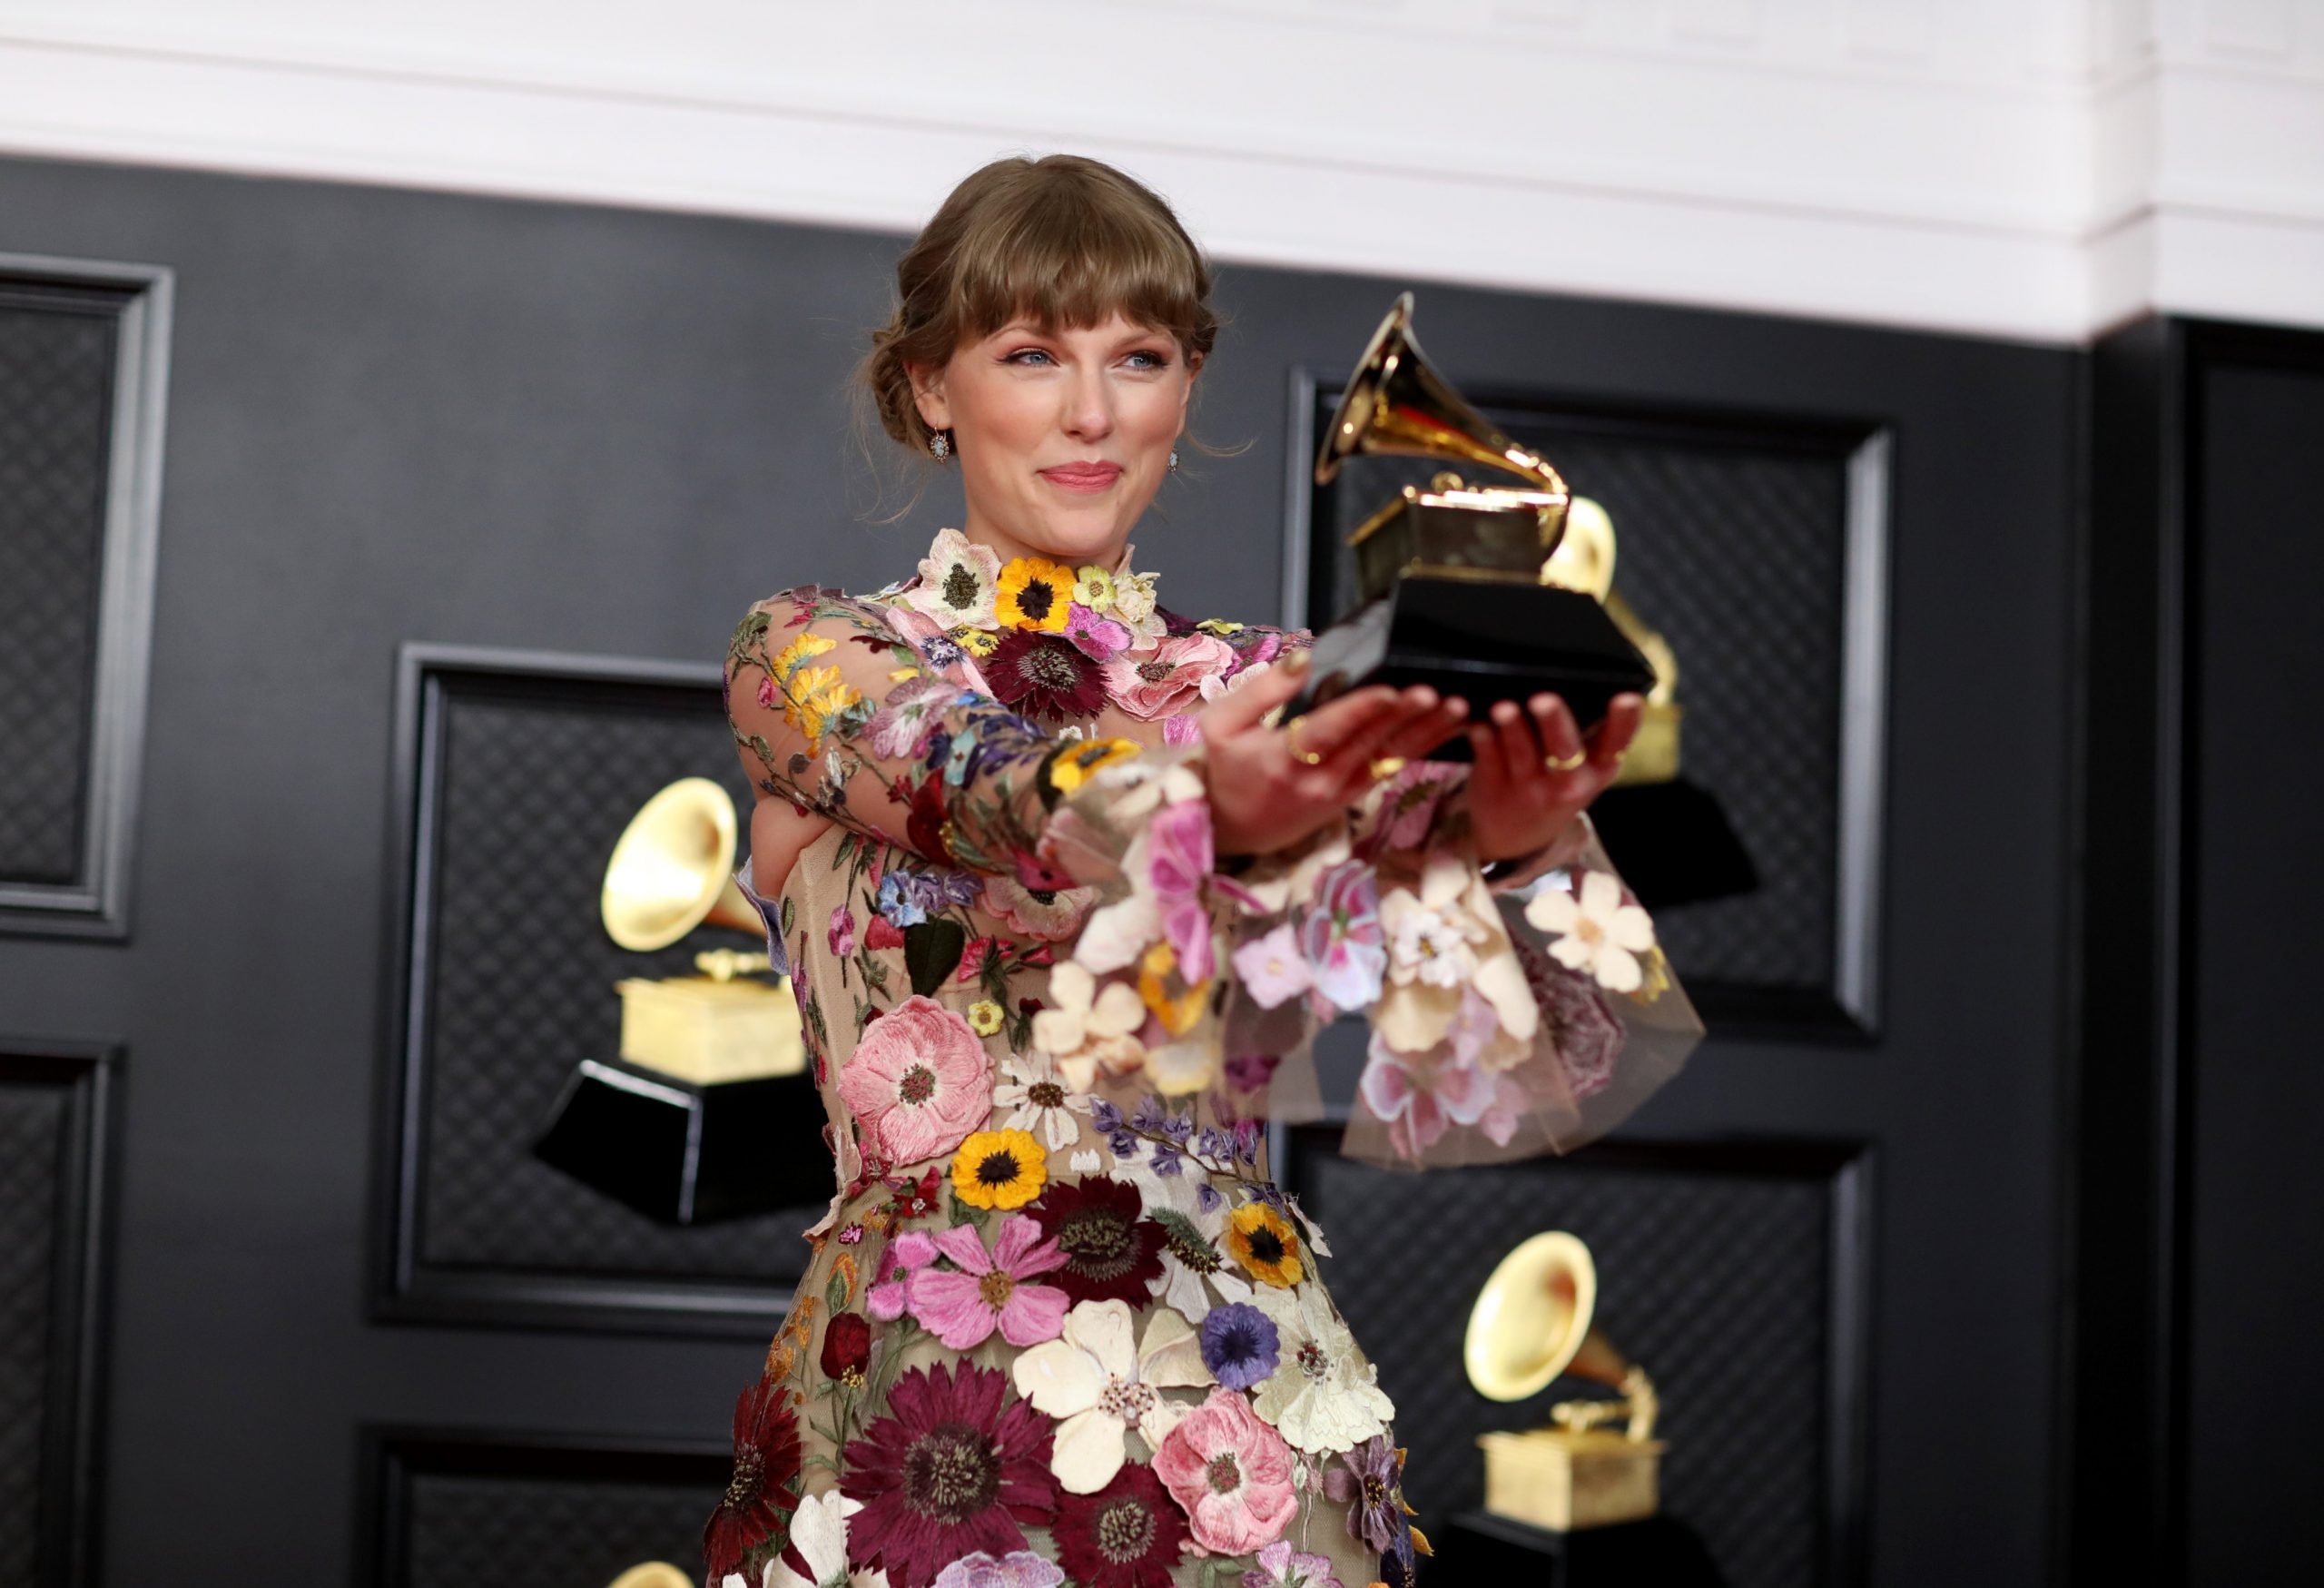 Taylor Swift backstage at the 2021 Grammy's with her award for Album of the Year – "folklore"